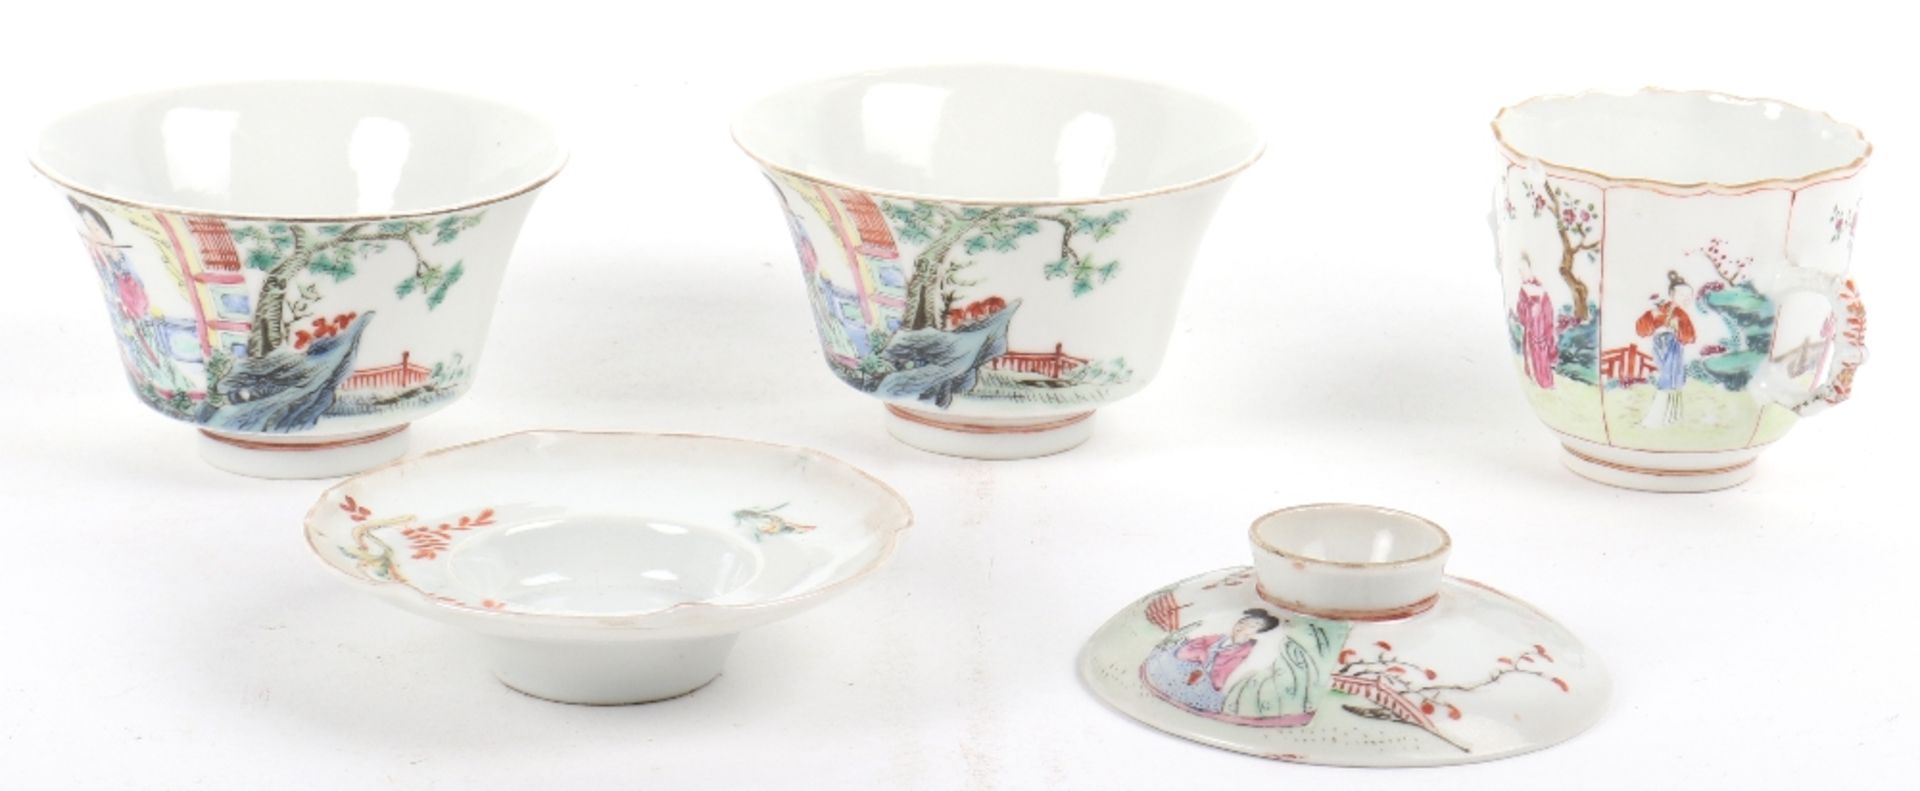 A pair of late 19th century Chinese famille rose porcelain bowls - Image 2 of 12